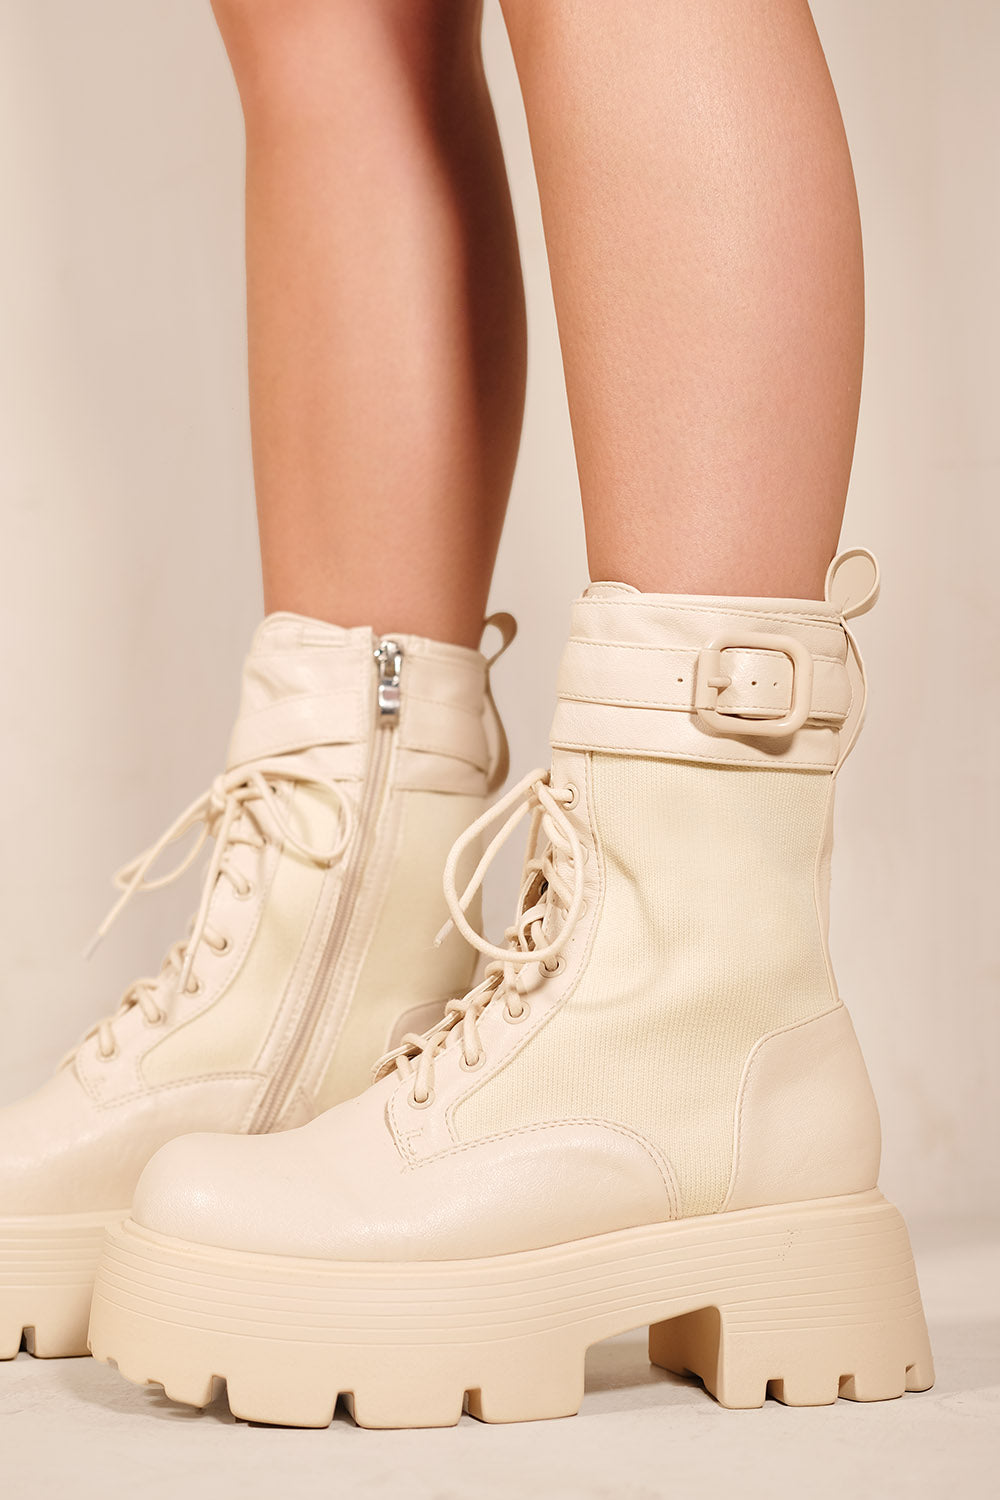 KERRIE CHUNKY ANKLE BOOTS WITH LACE UP & SIDE ZIP IN IVORY CREAM FAUX LEATHER